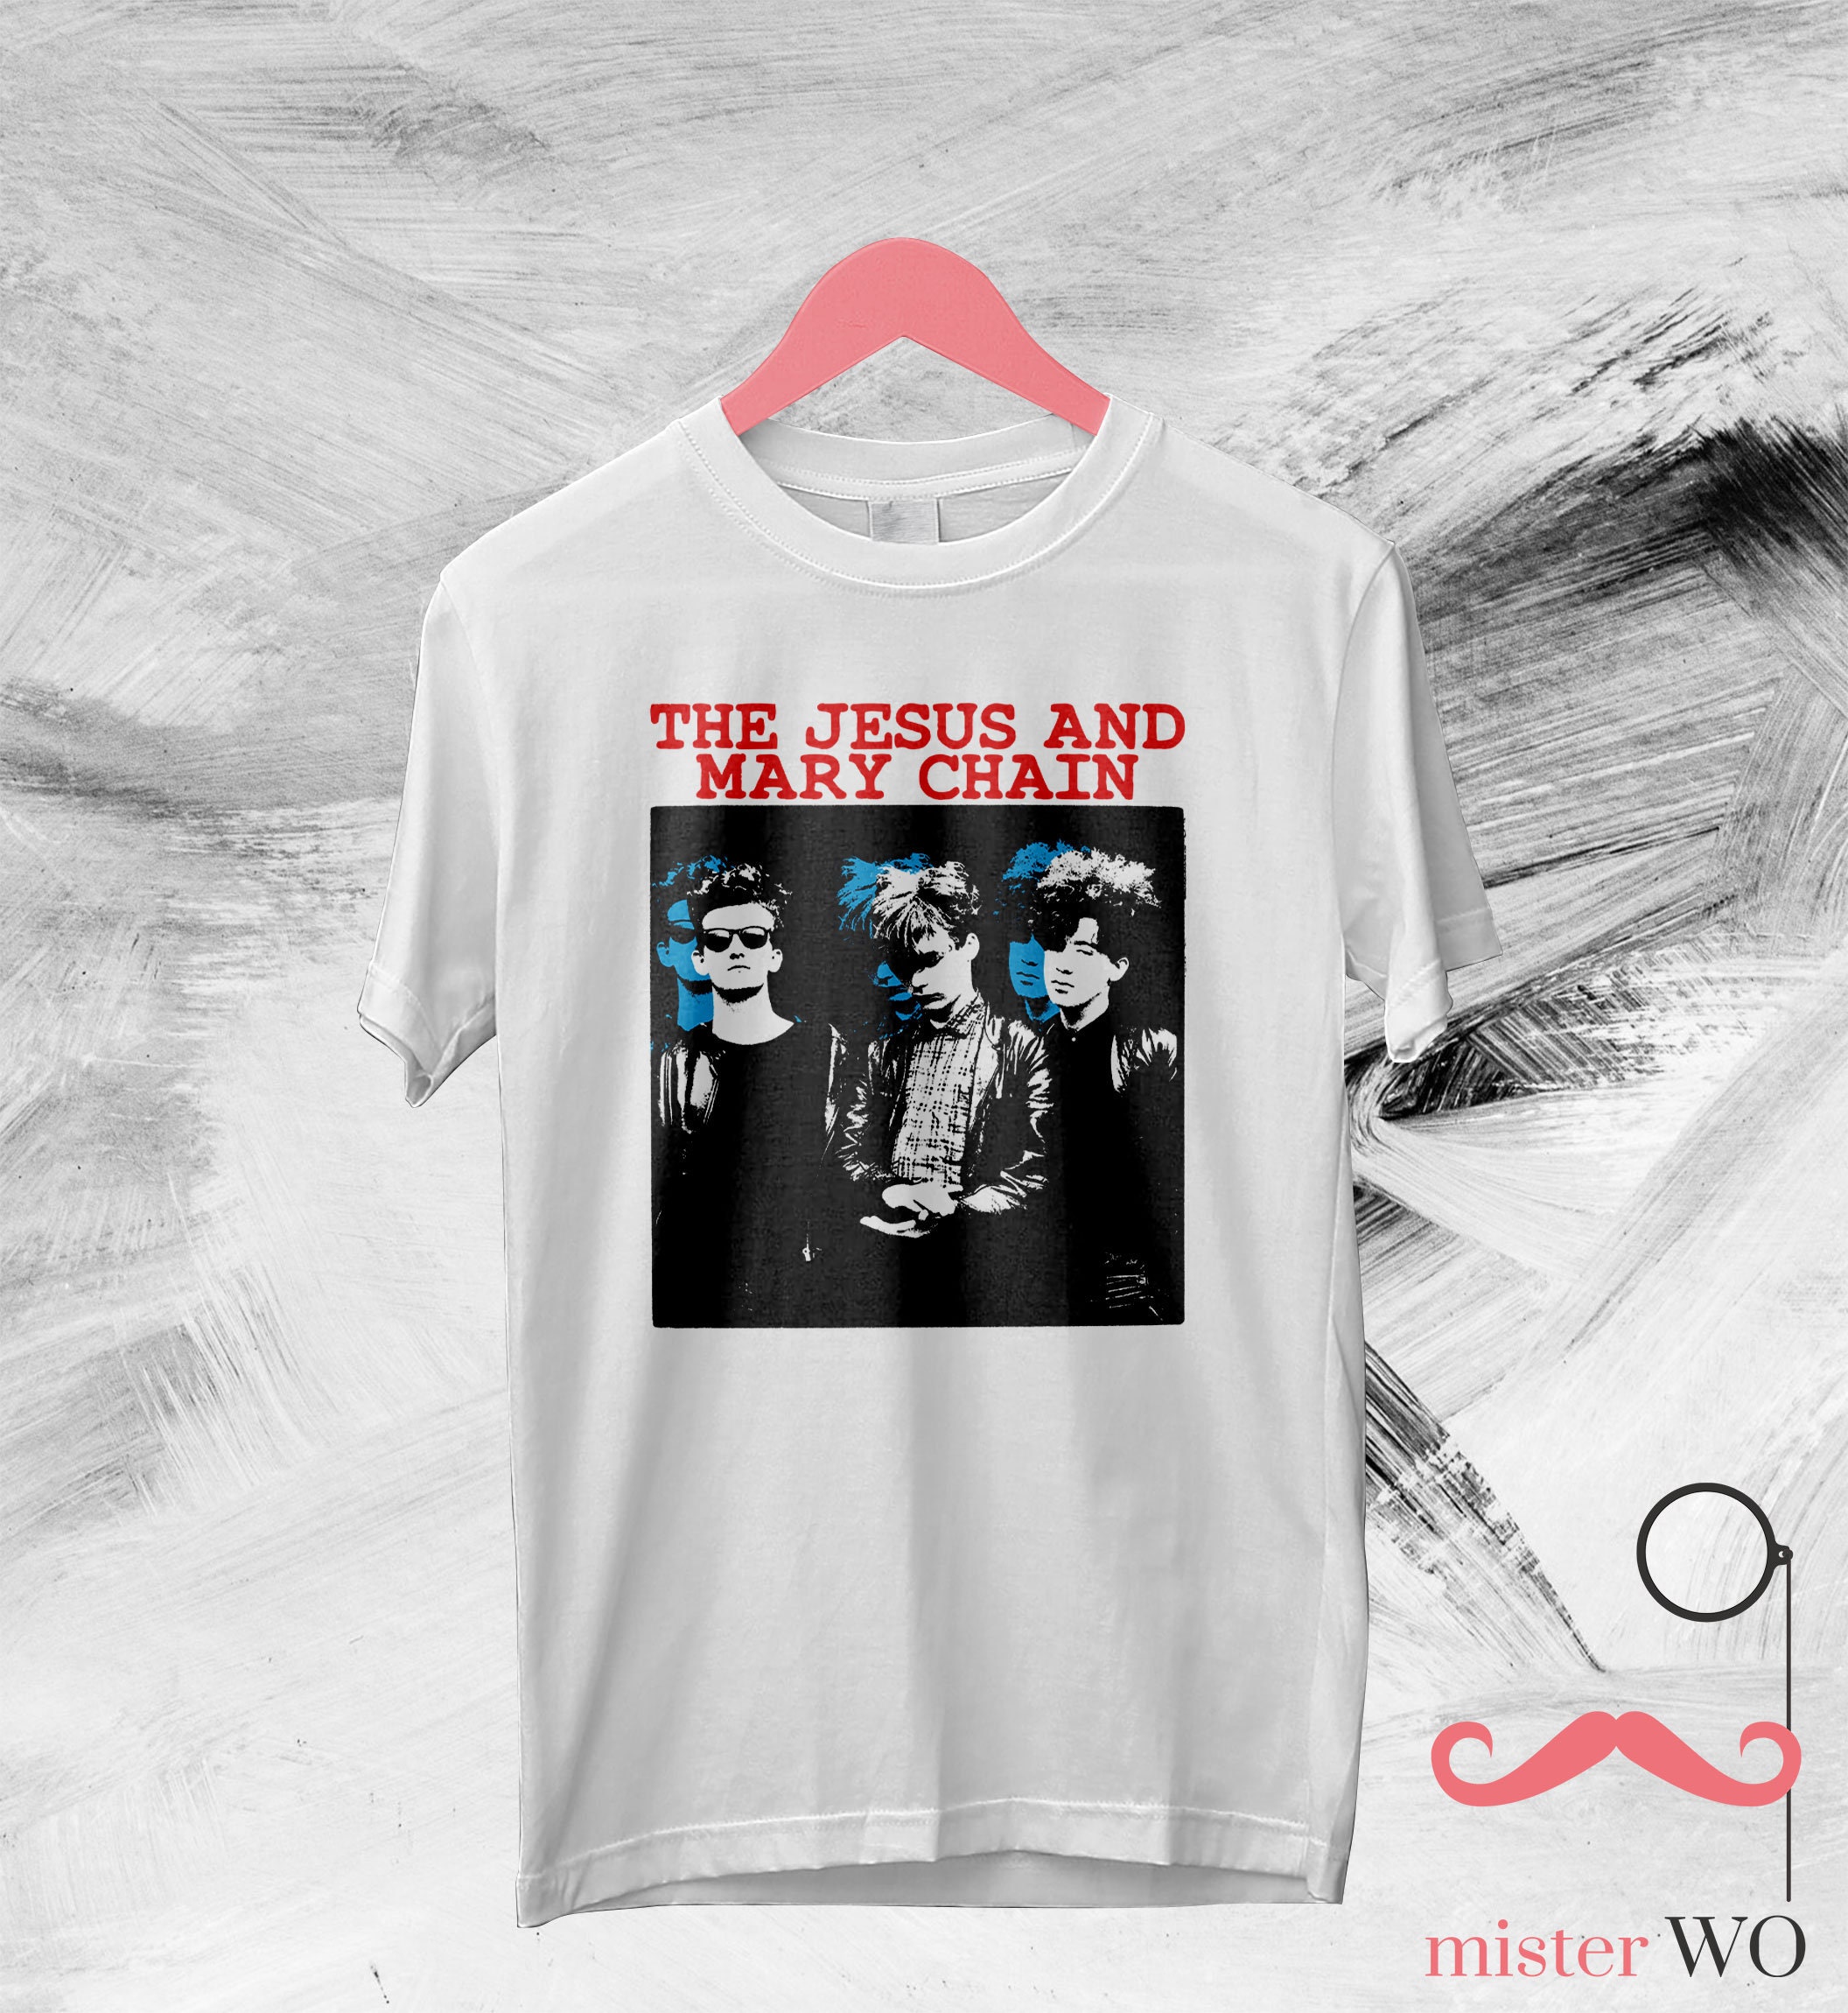 The Jesus and Mary Chain Vintage 90's T Shirt - The Jesus and Mary Chain Shirt